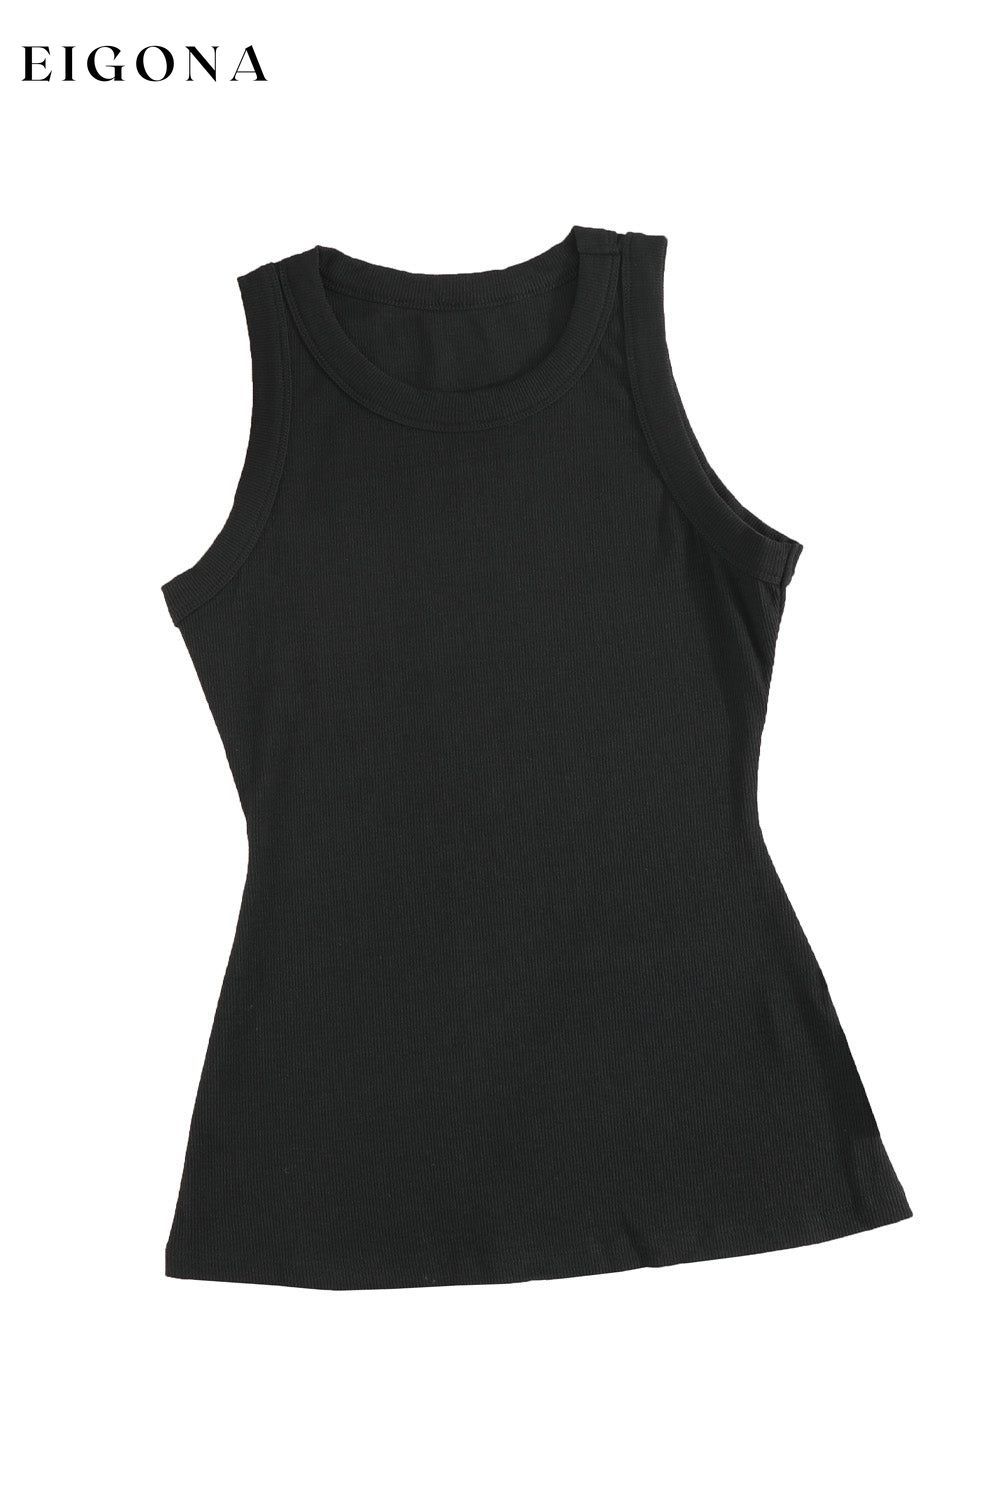 Solid Black Round Neck Ribbed Tank Top All In Stock black tank top clothes Season Summer shirts Size S To 2XL tank tank top top tops